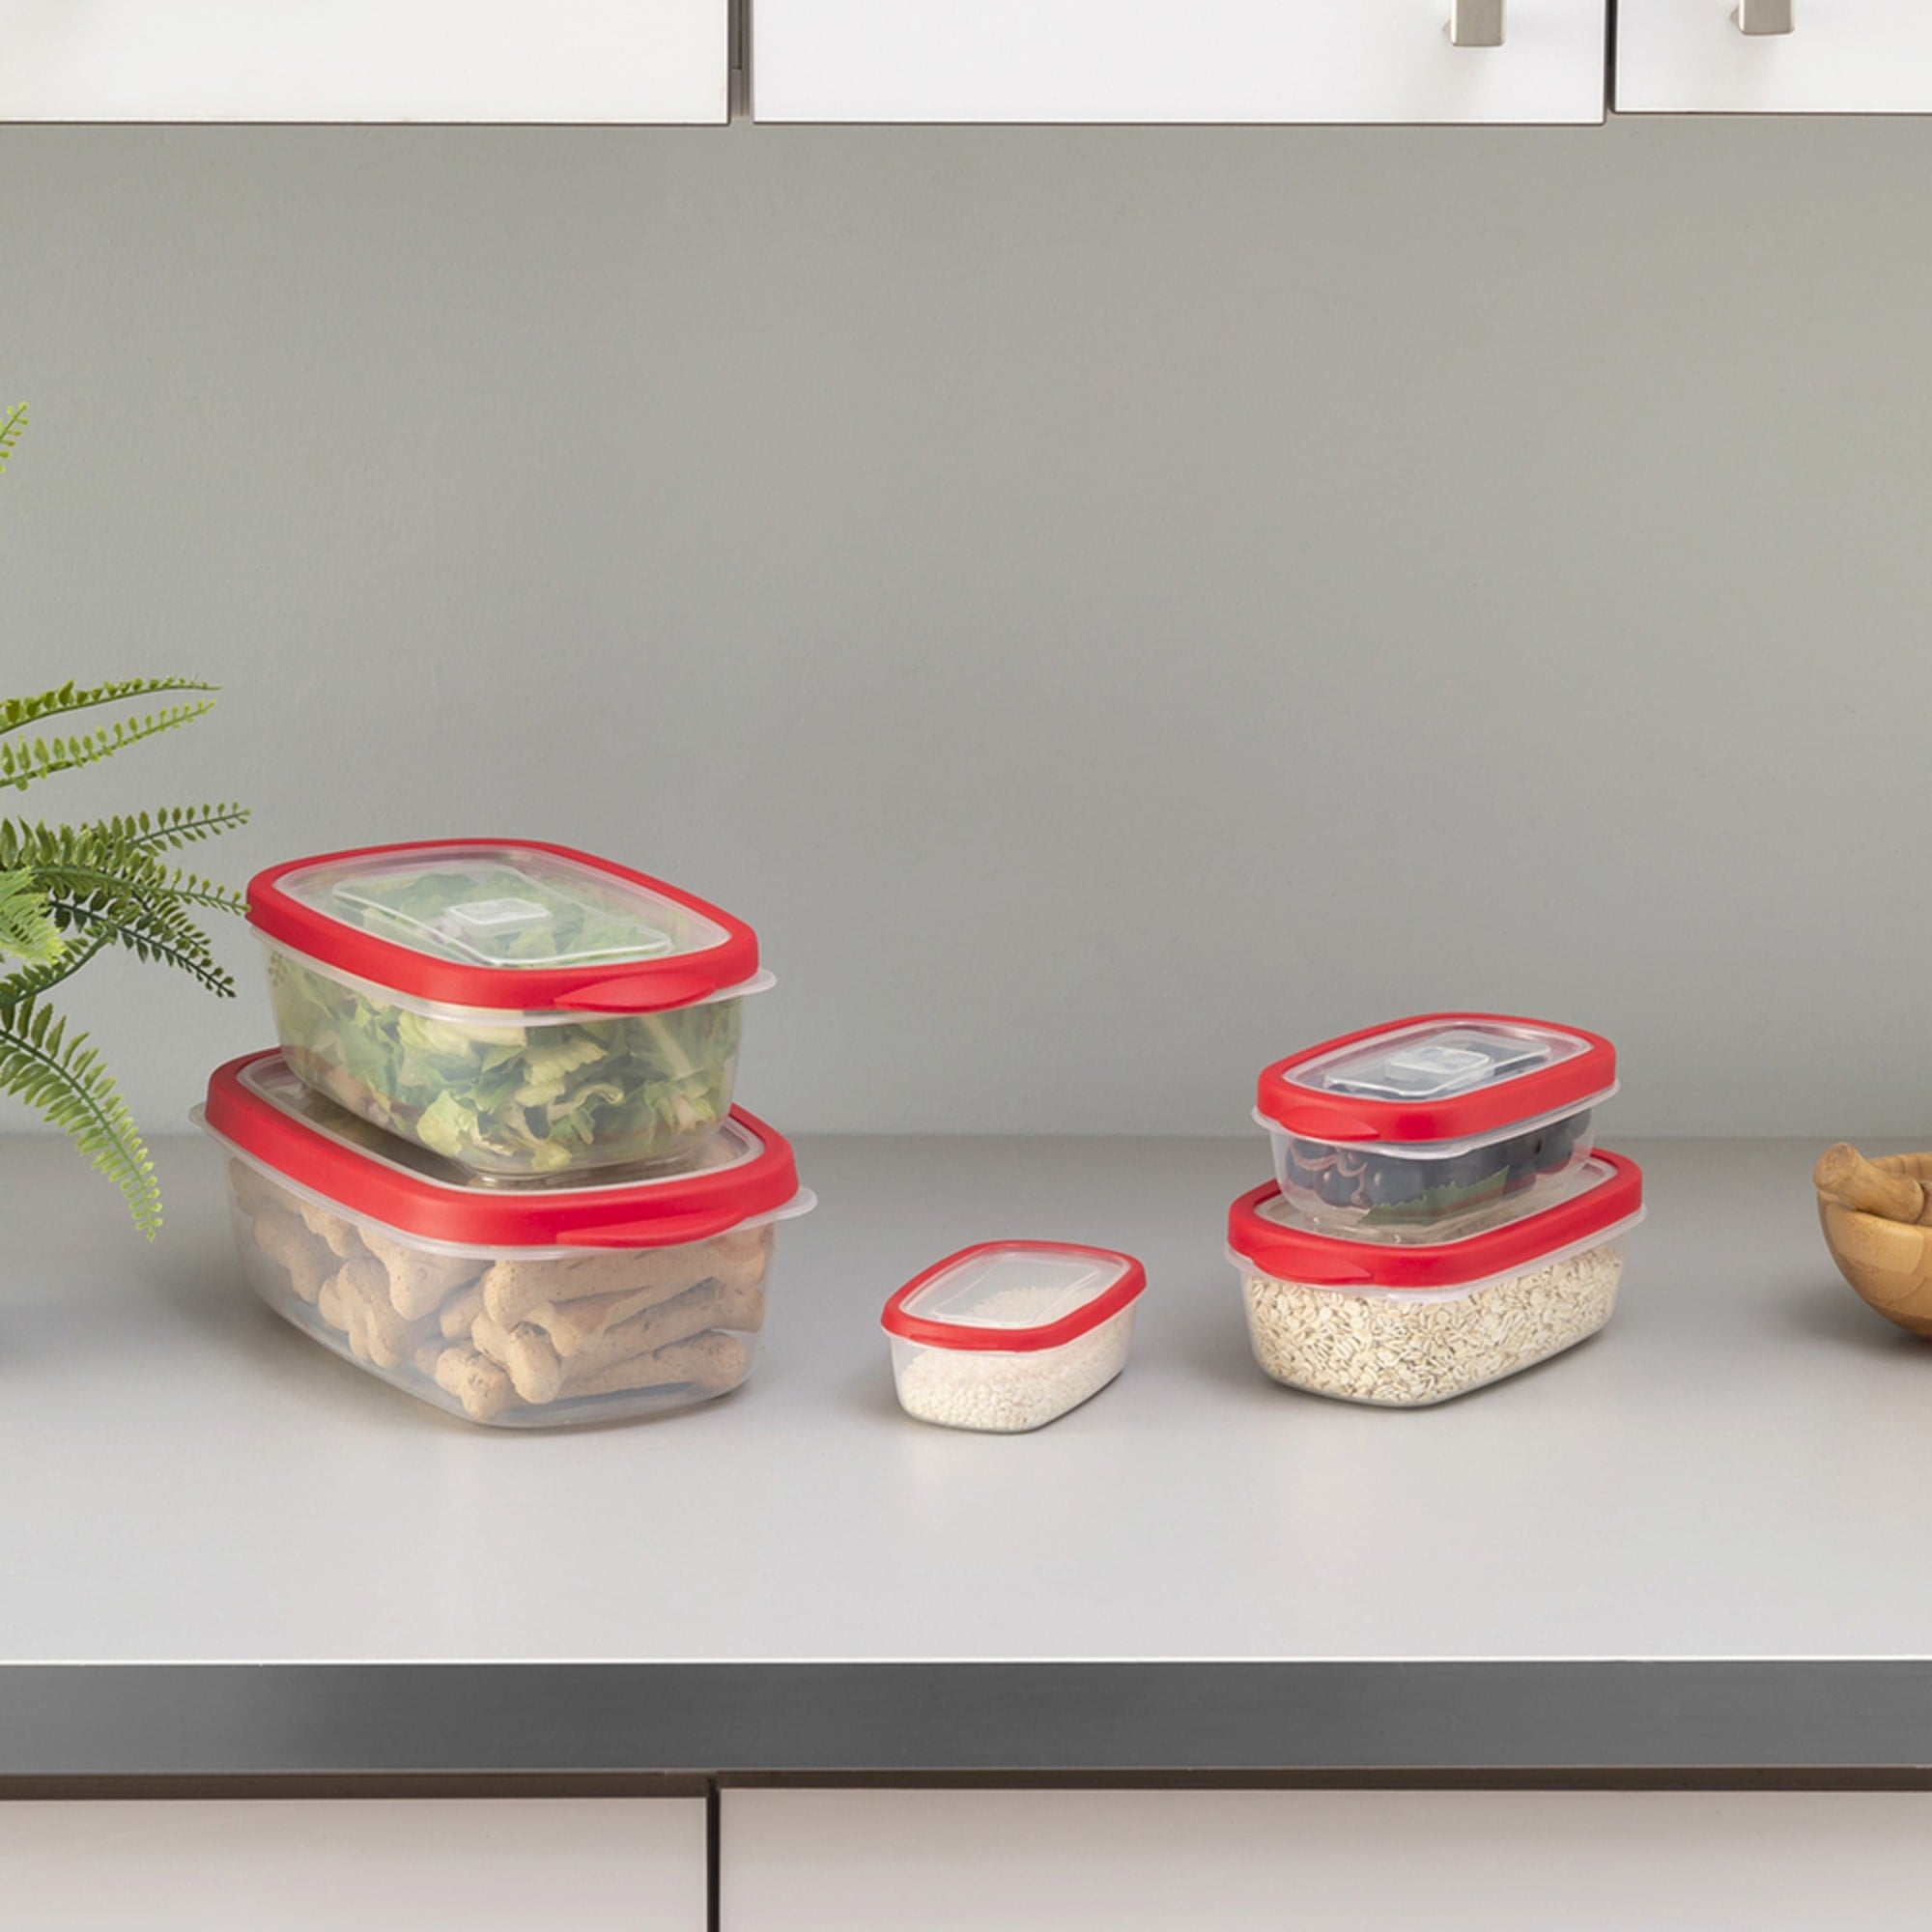 Rubbermaid Easy Find Lids Clear Food Storage Container Set 12 pk